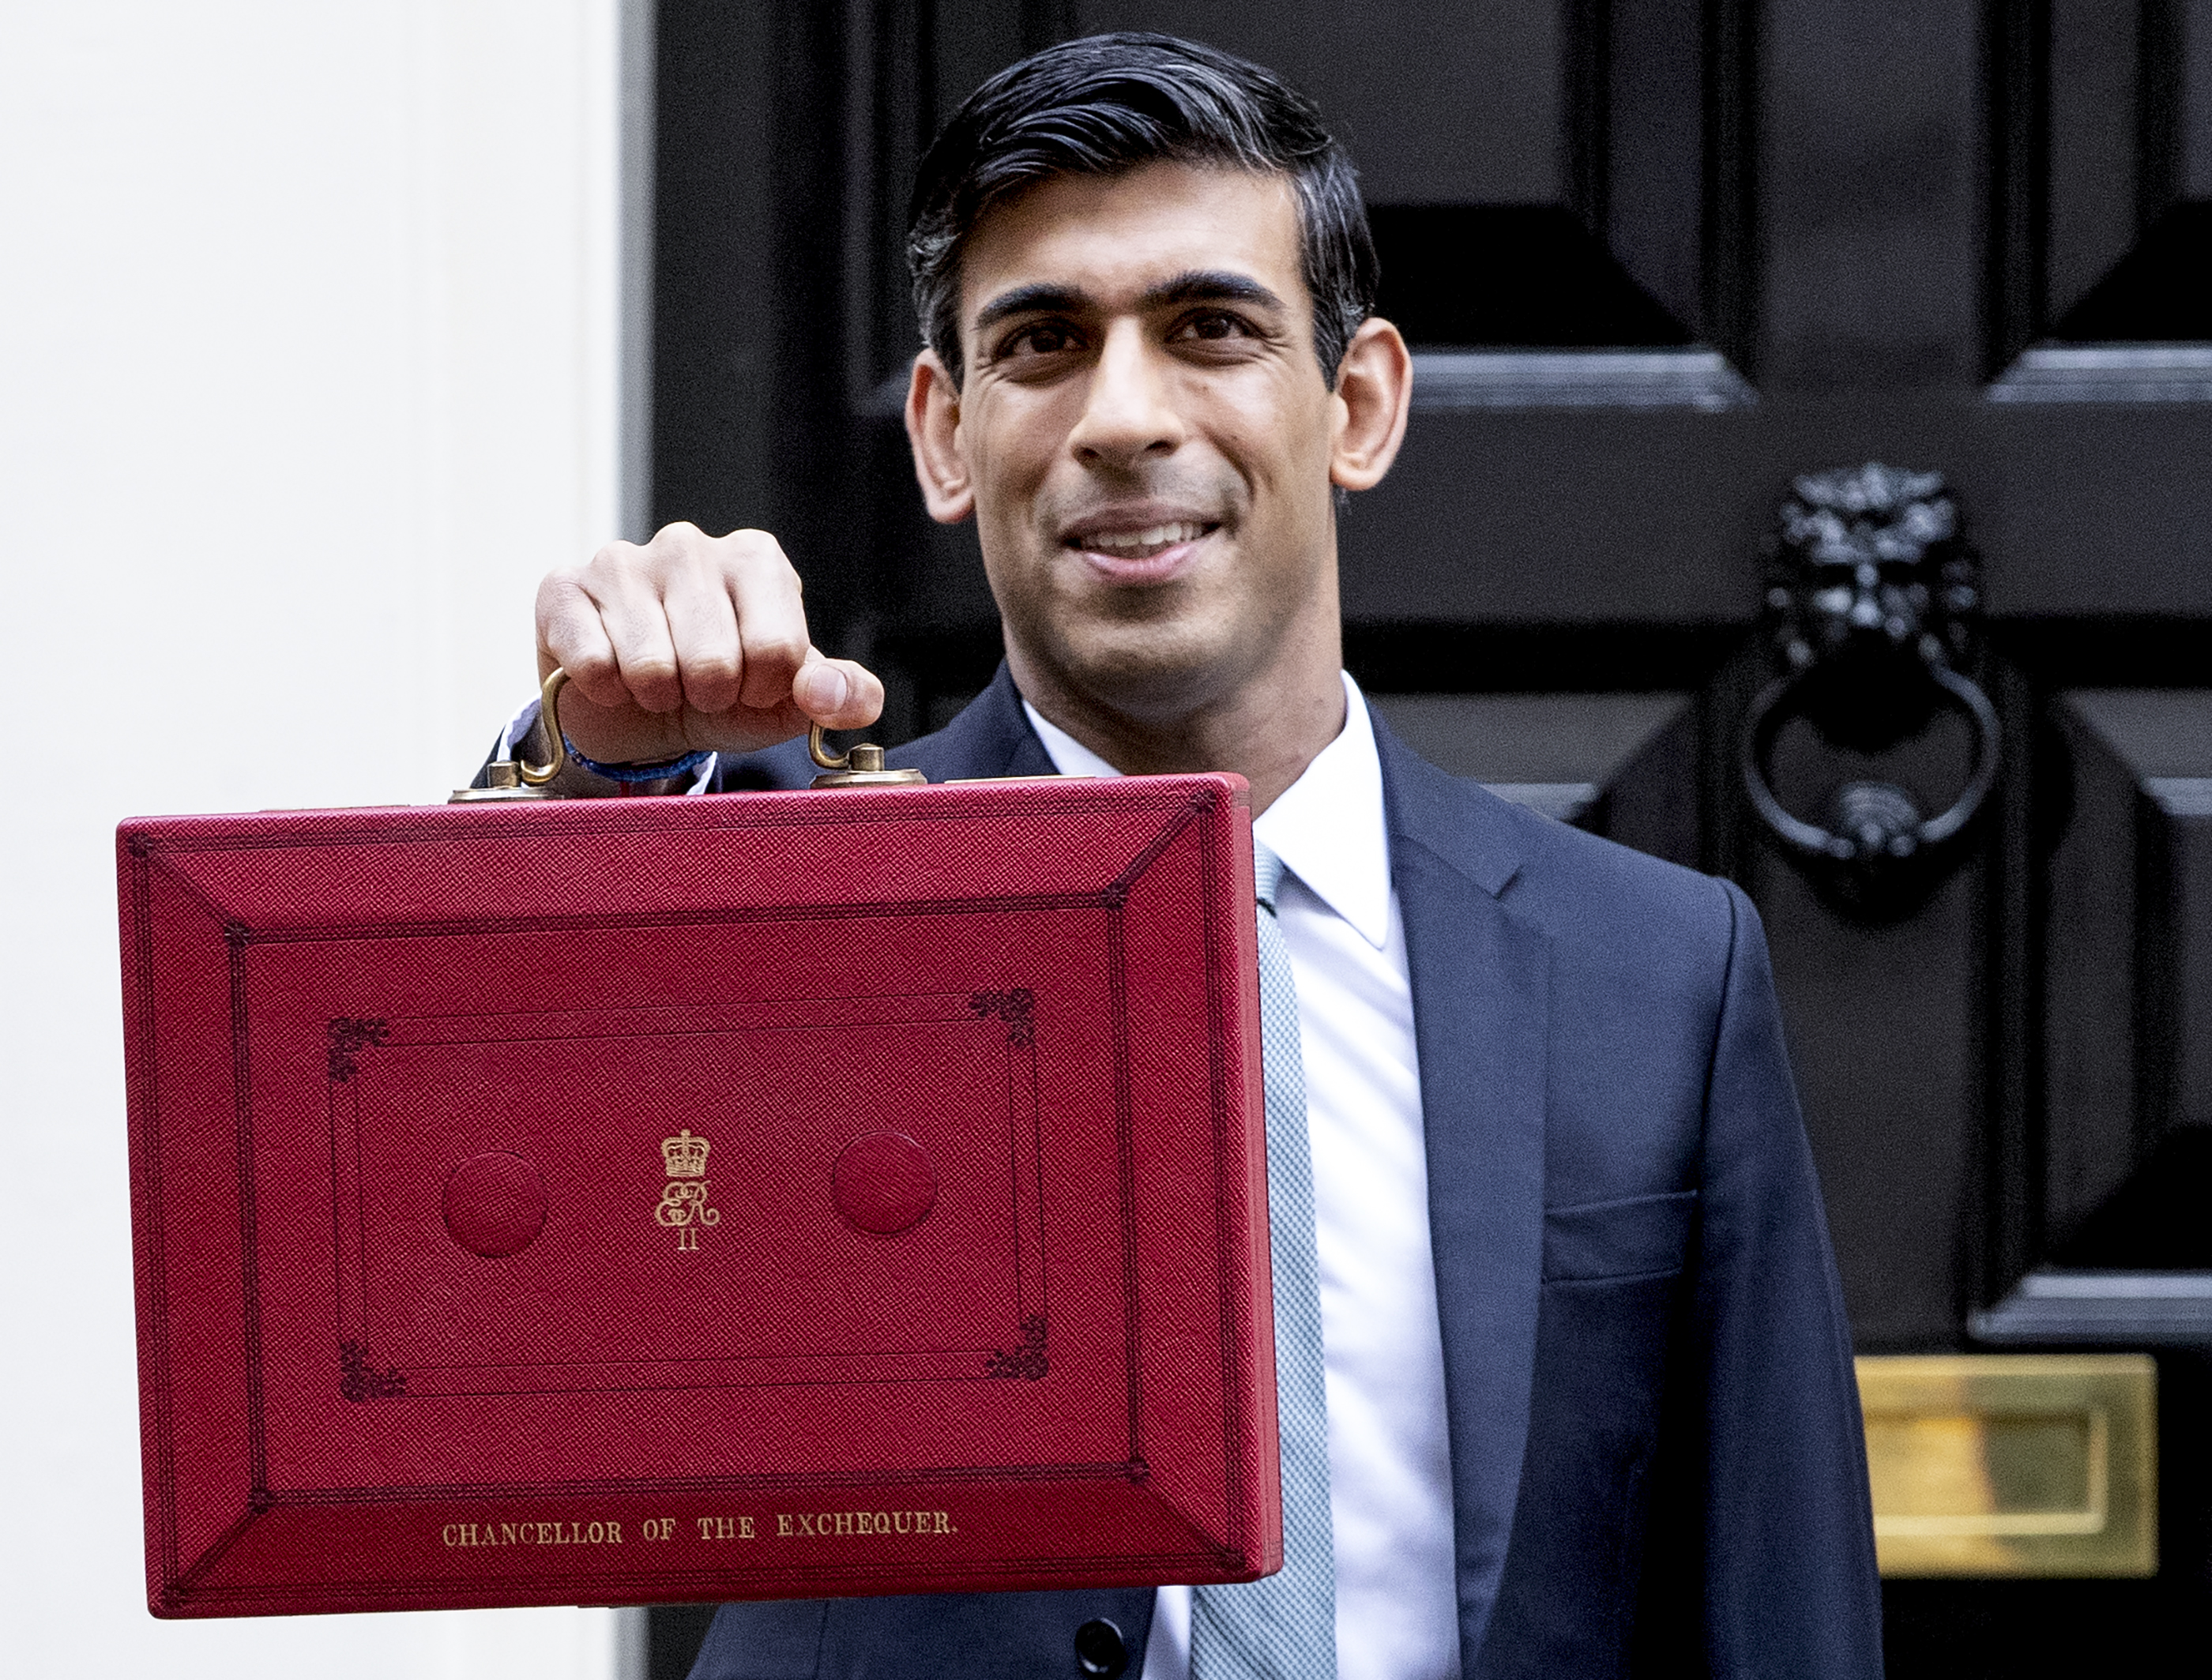 Chancellor of the Exchequer, Rishi Sunak MP, on budget day 11 March 2020 